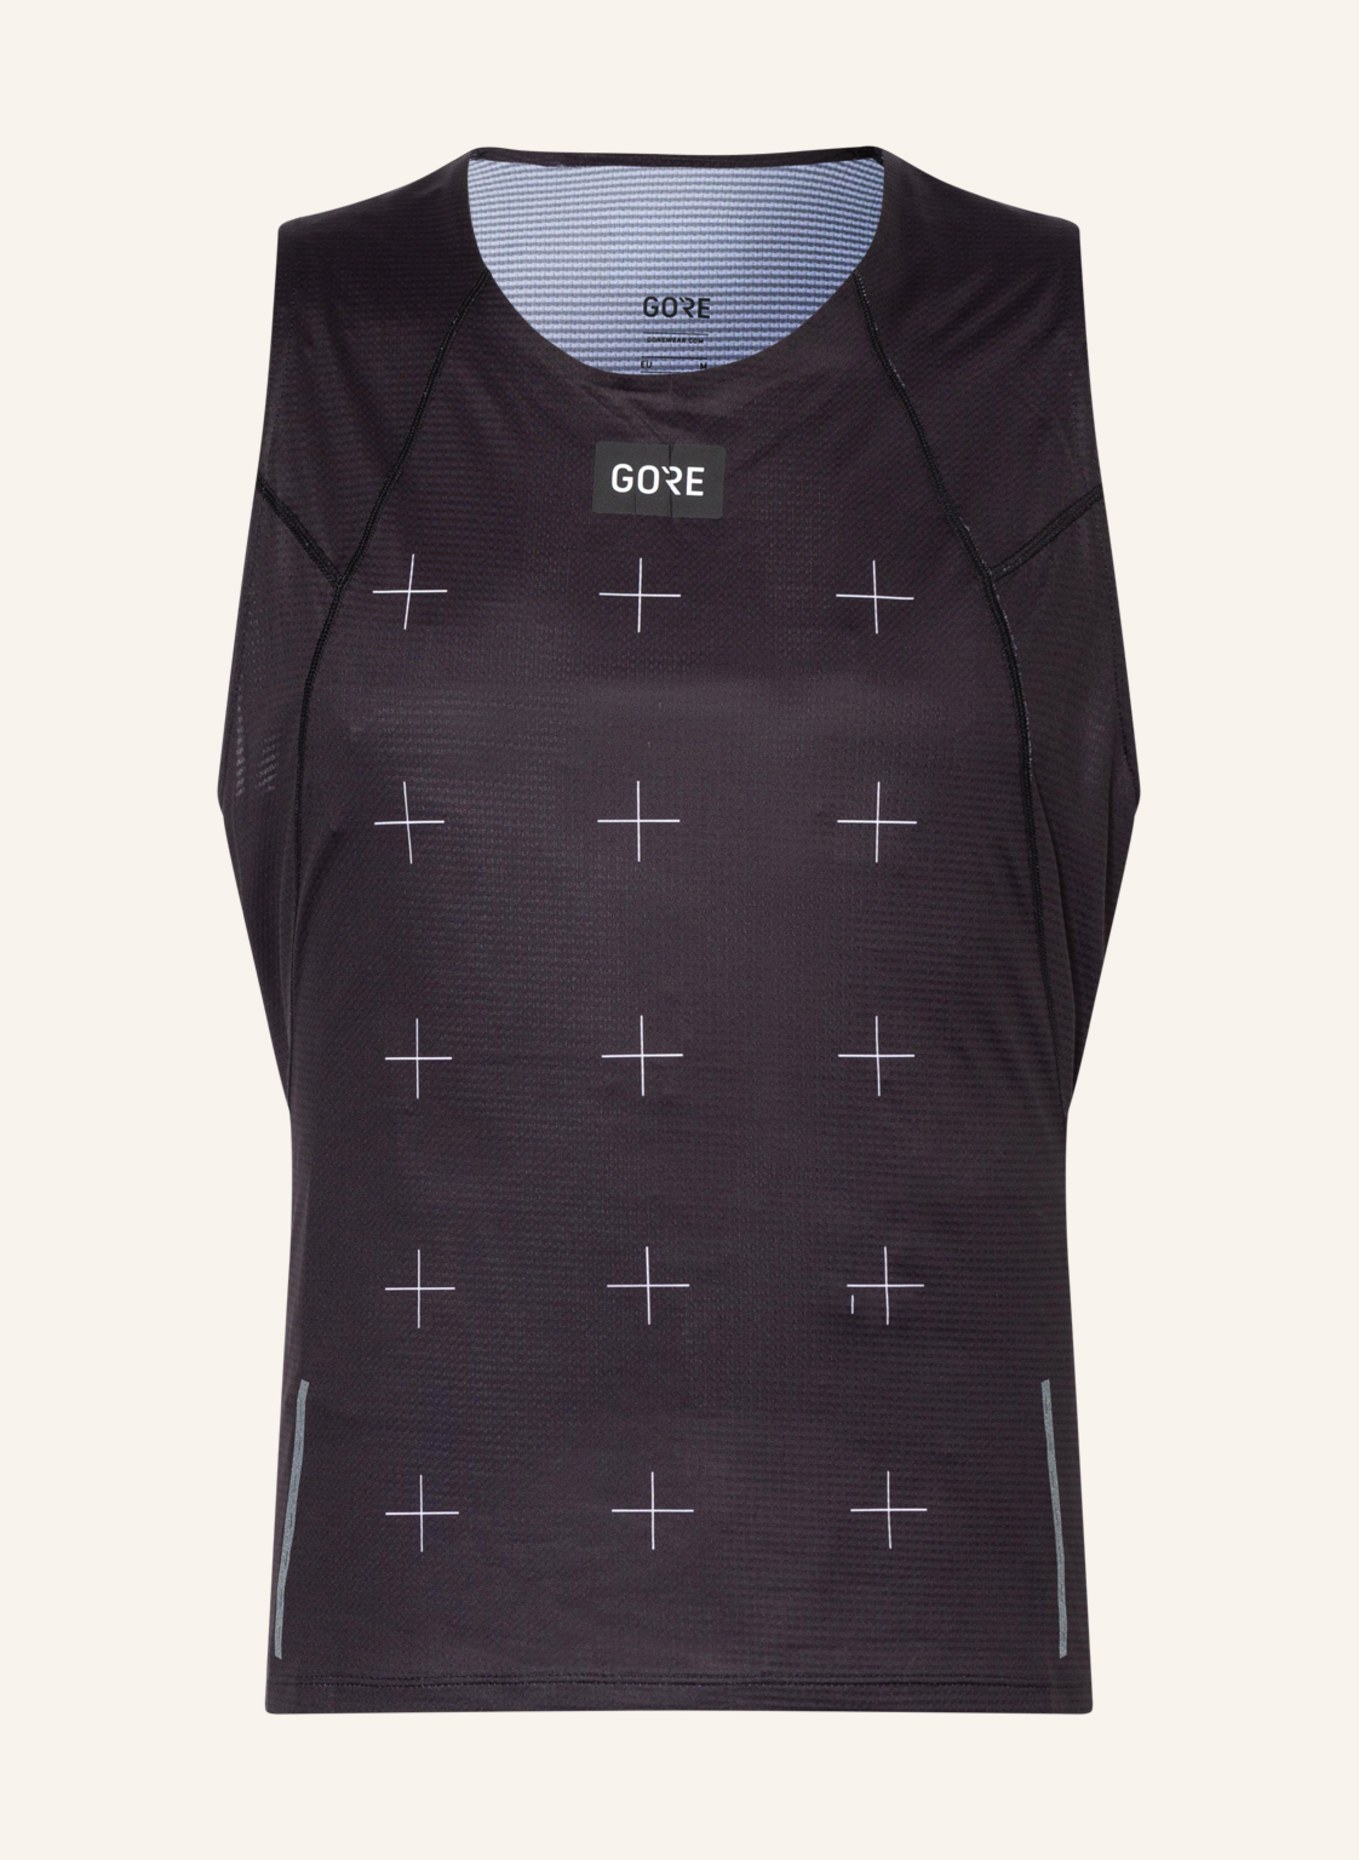 GORE RUNNING WEAR Tank top CONTEST DAILY, Color: BLACK (Image 1)